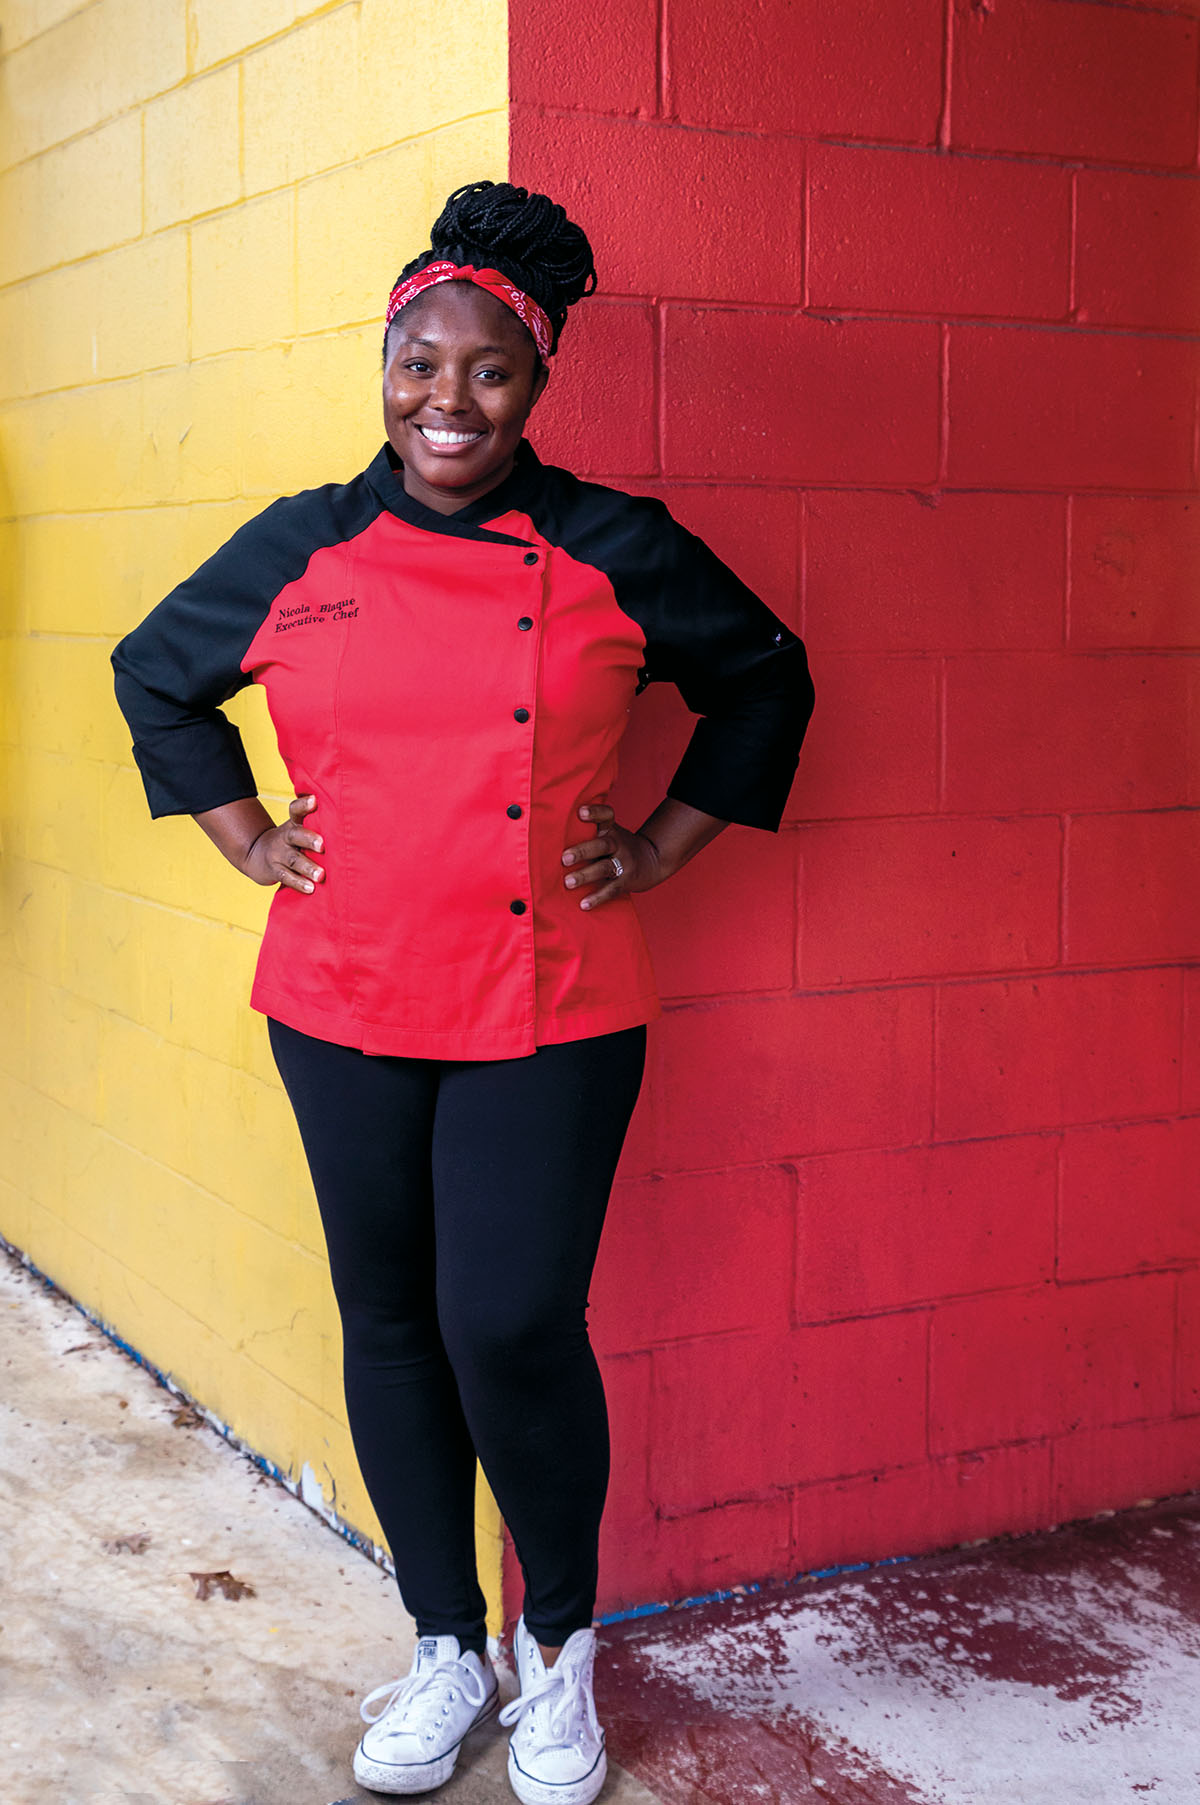 A woman in a red and black chef's jacket stands in front of a red and yellow brick wall